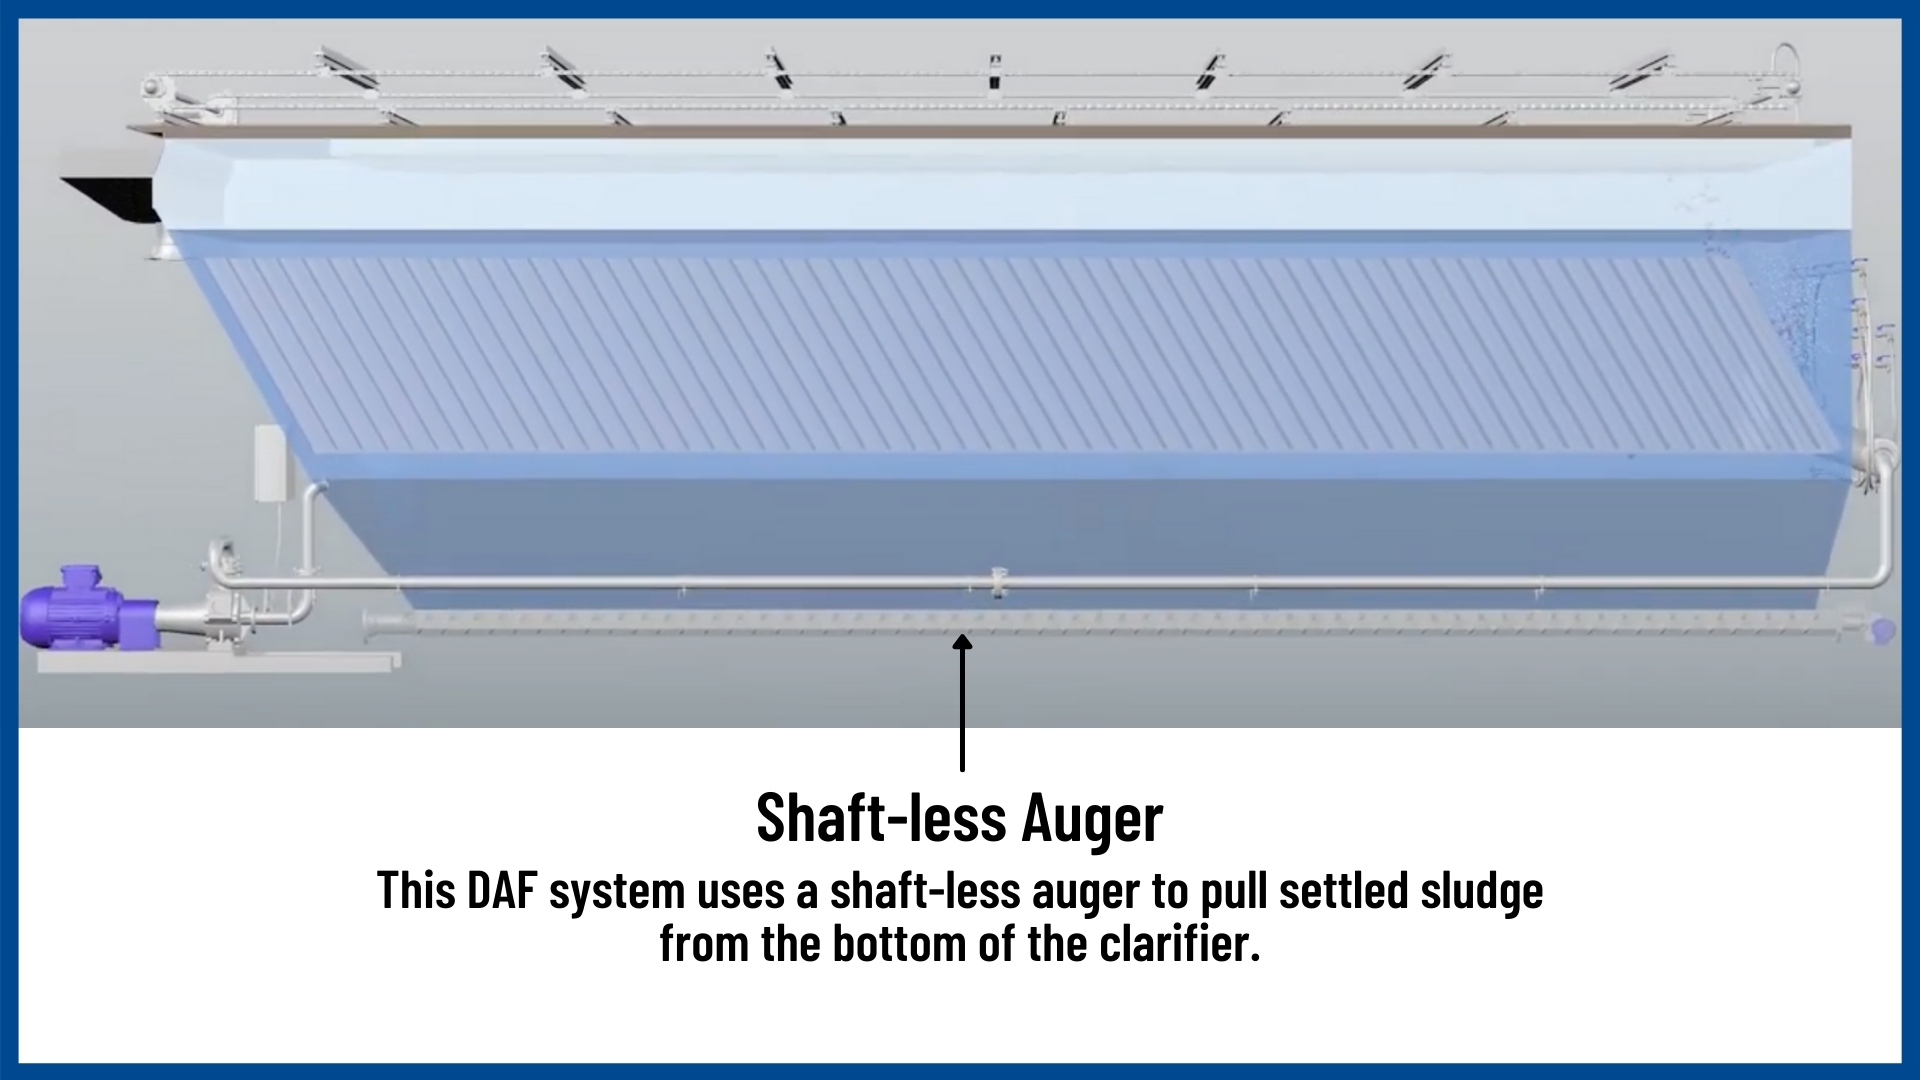 A rendered image of a DAF clarifier with a description highlighting the shaftless auger.